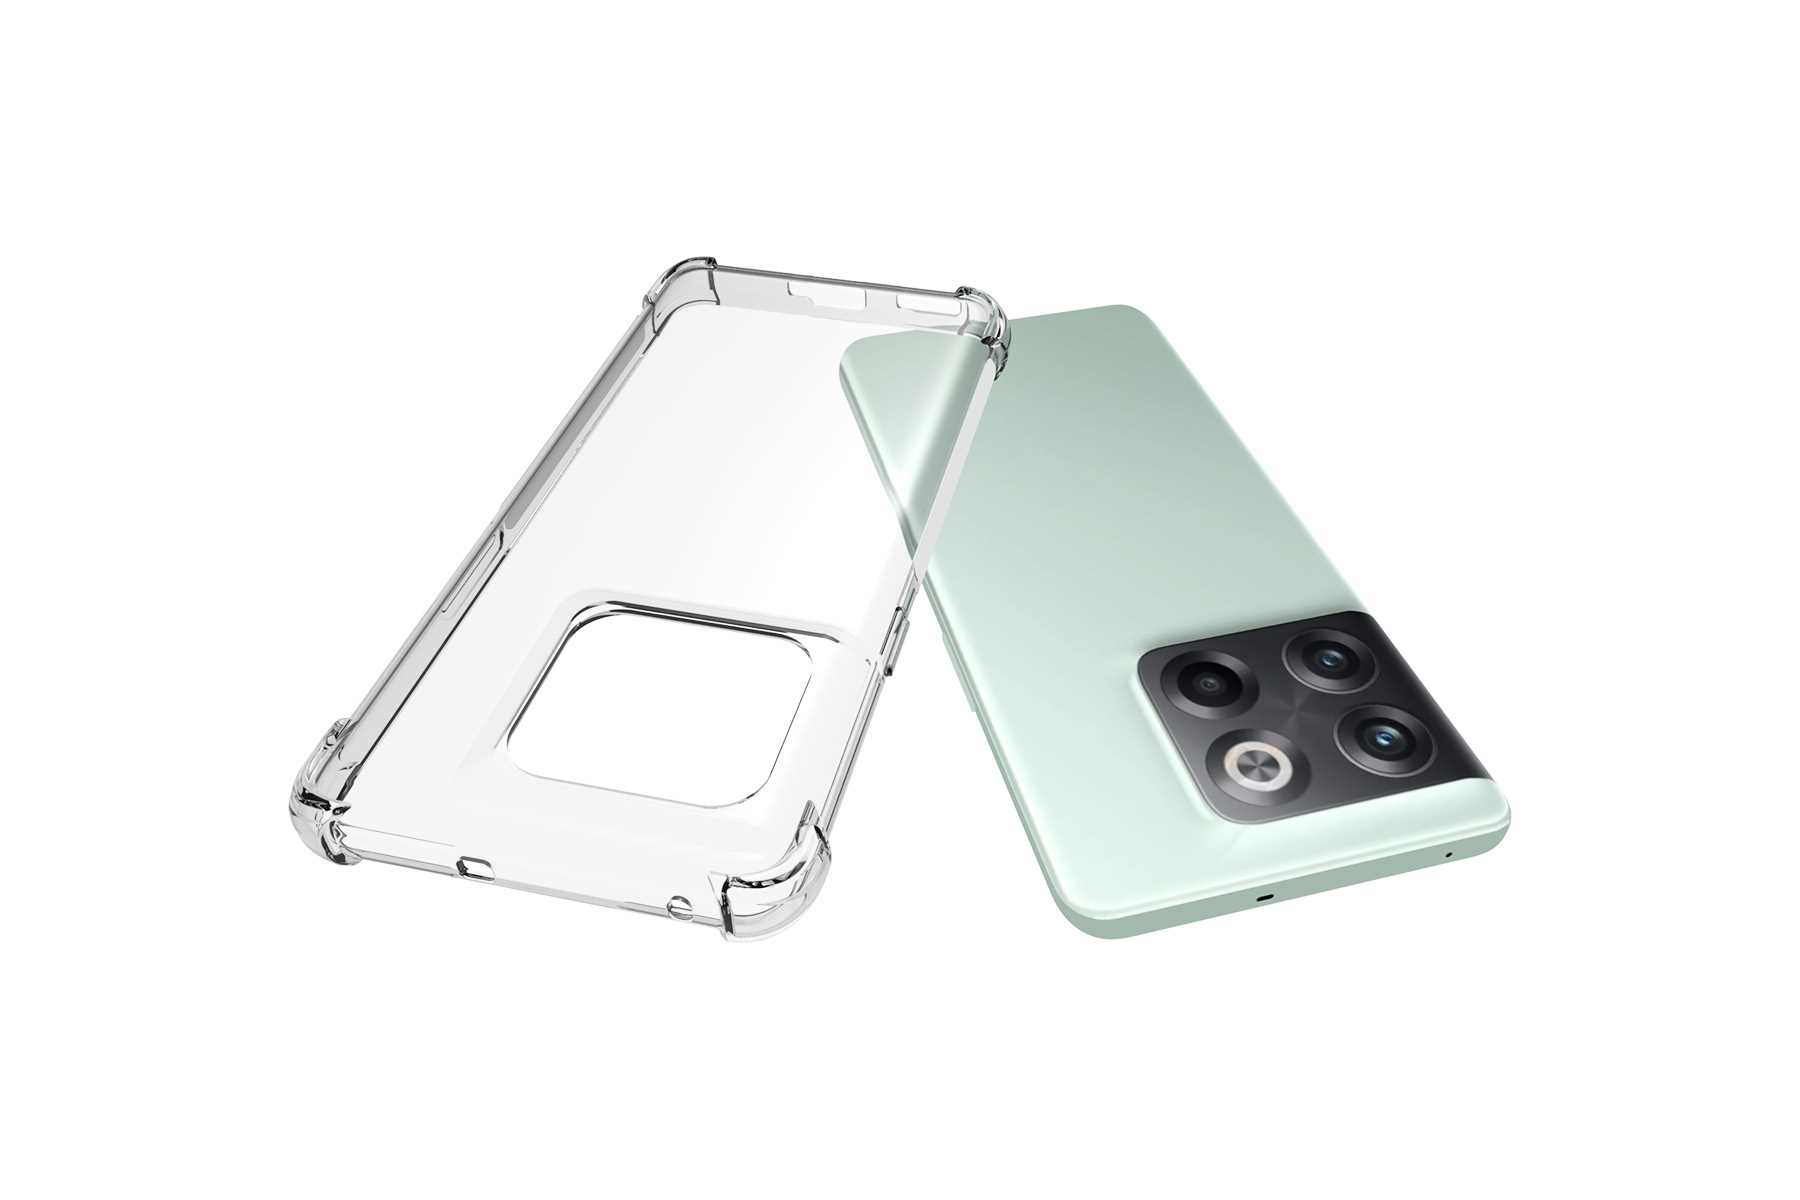 Case, 5G, Transparent OnePlus, Clear ENERGY Backcover, Armor 10T MORE MTB